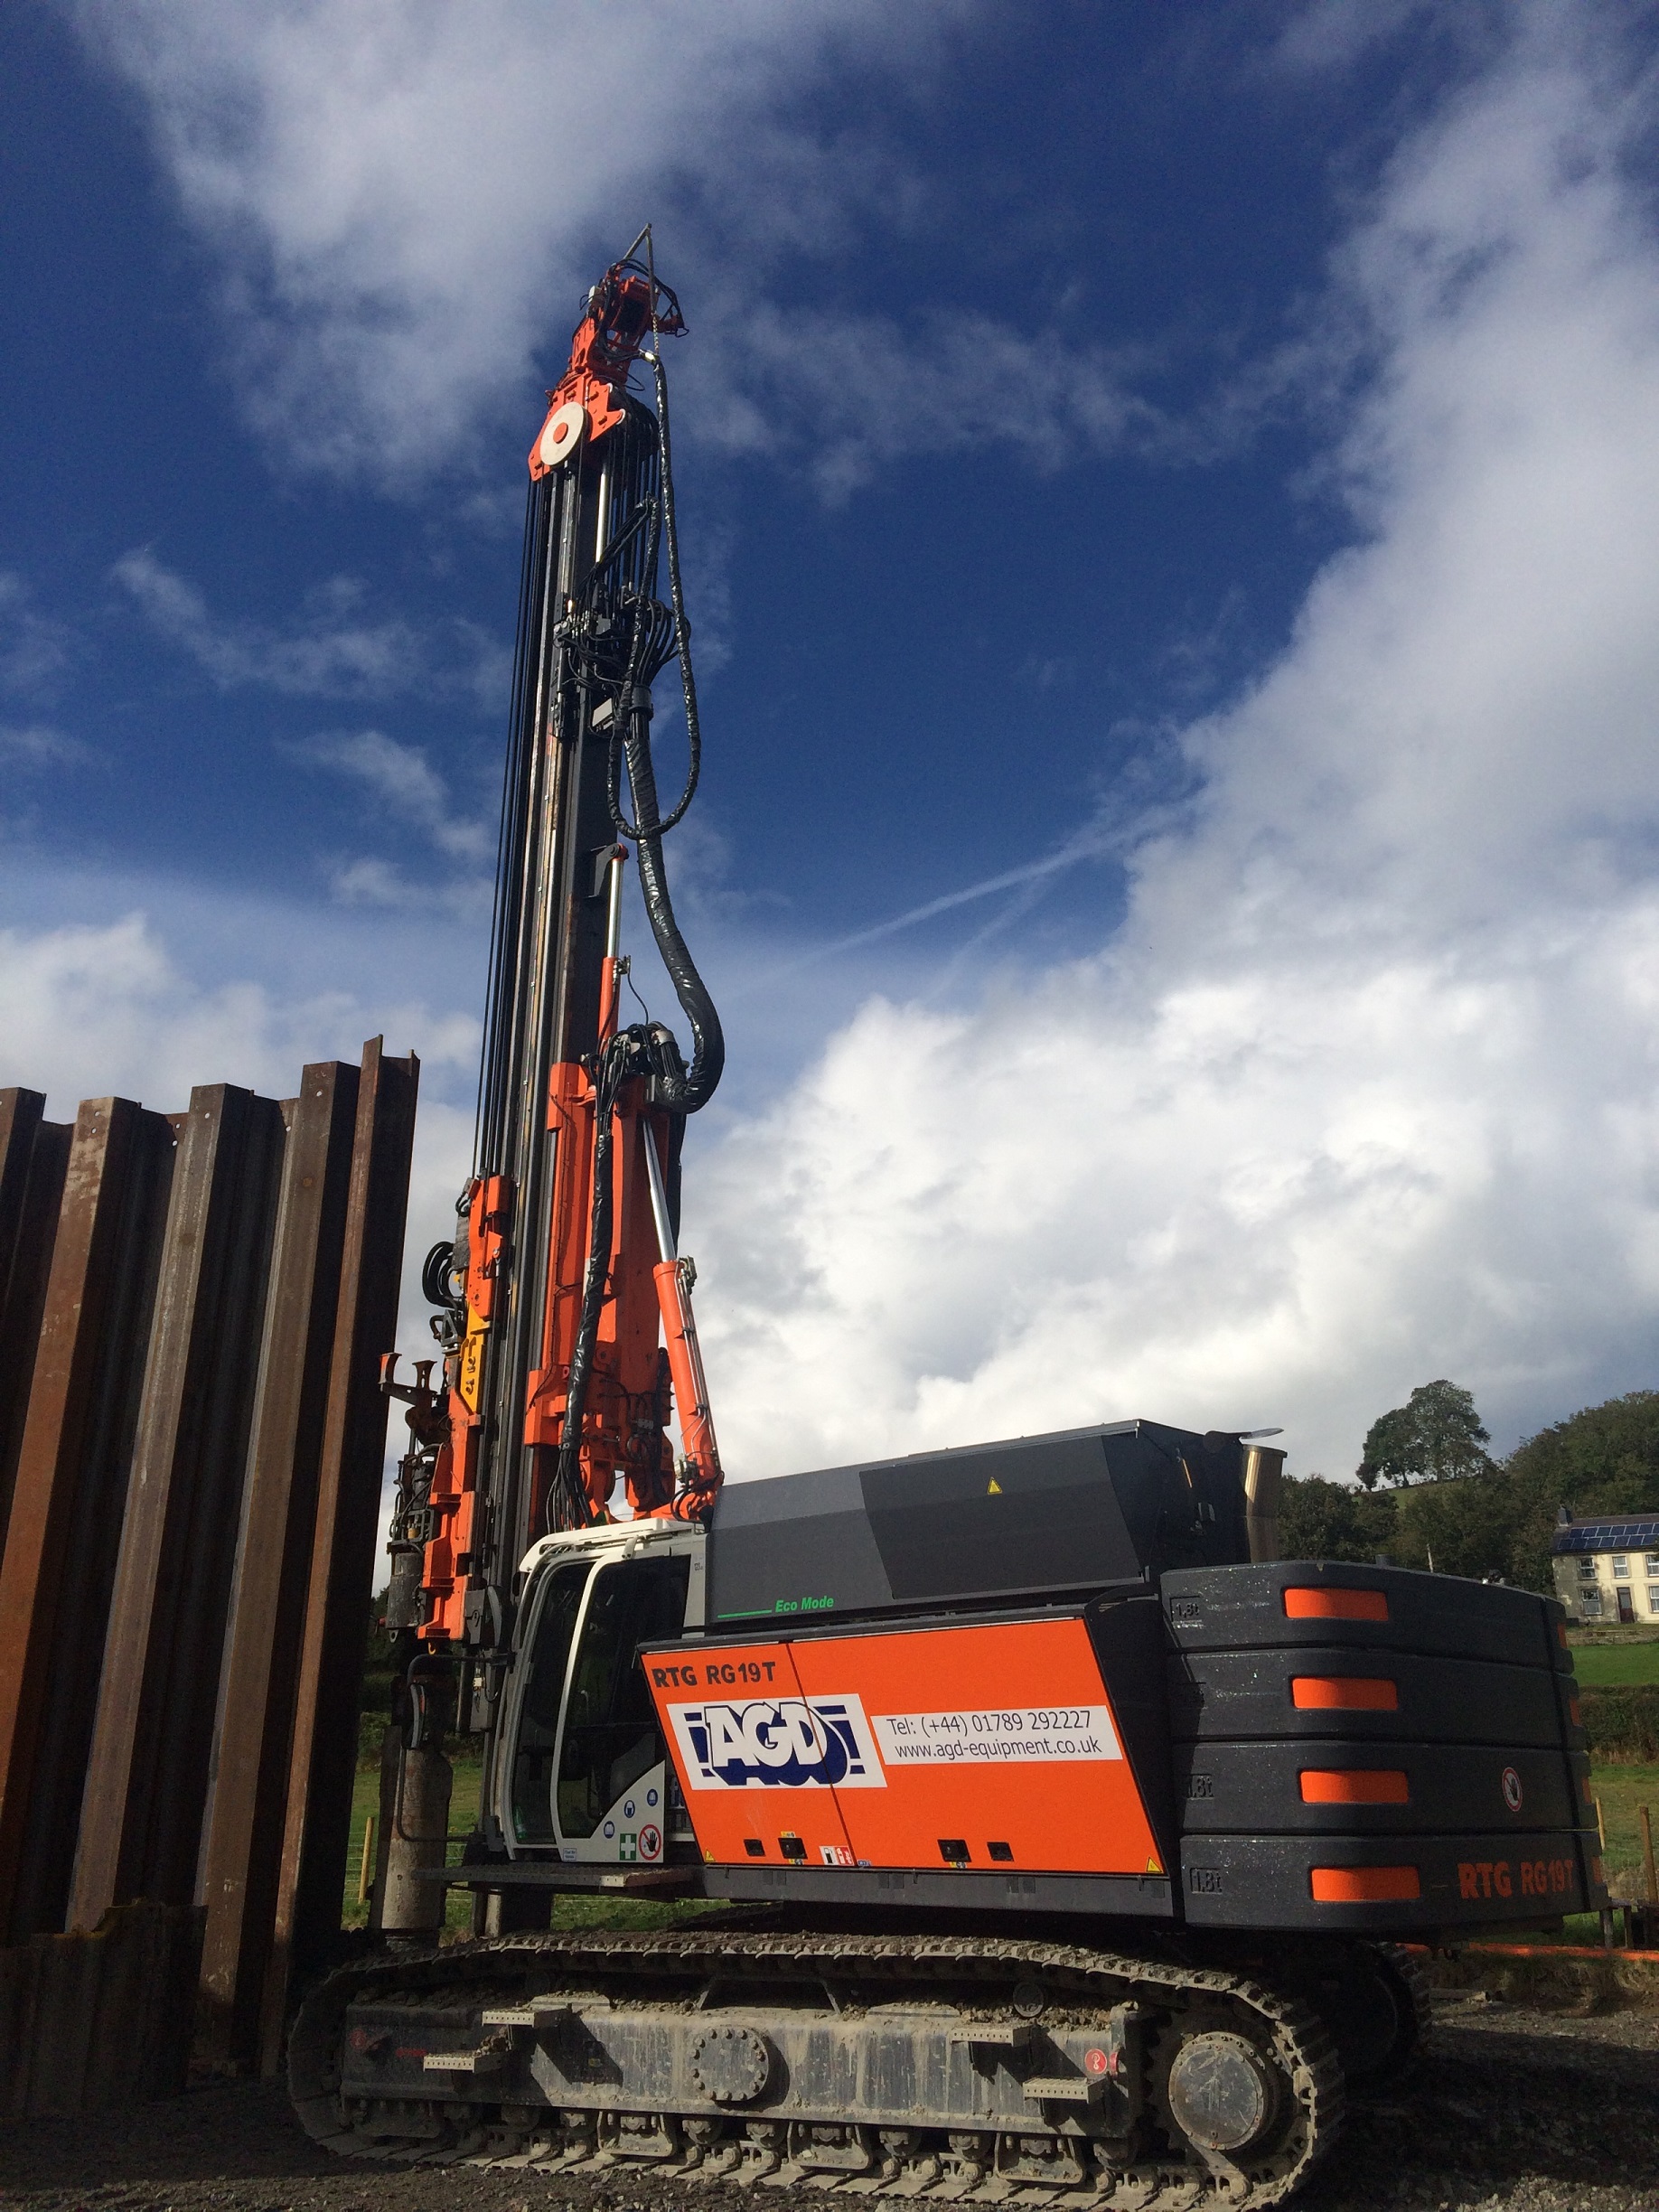 RTG RG19T telescopic leader rig on hire in Wales